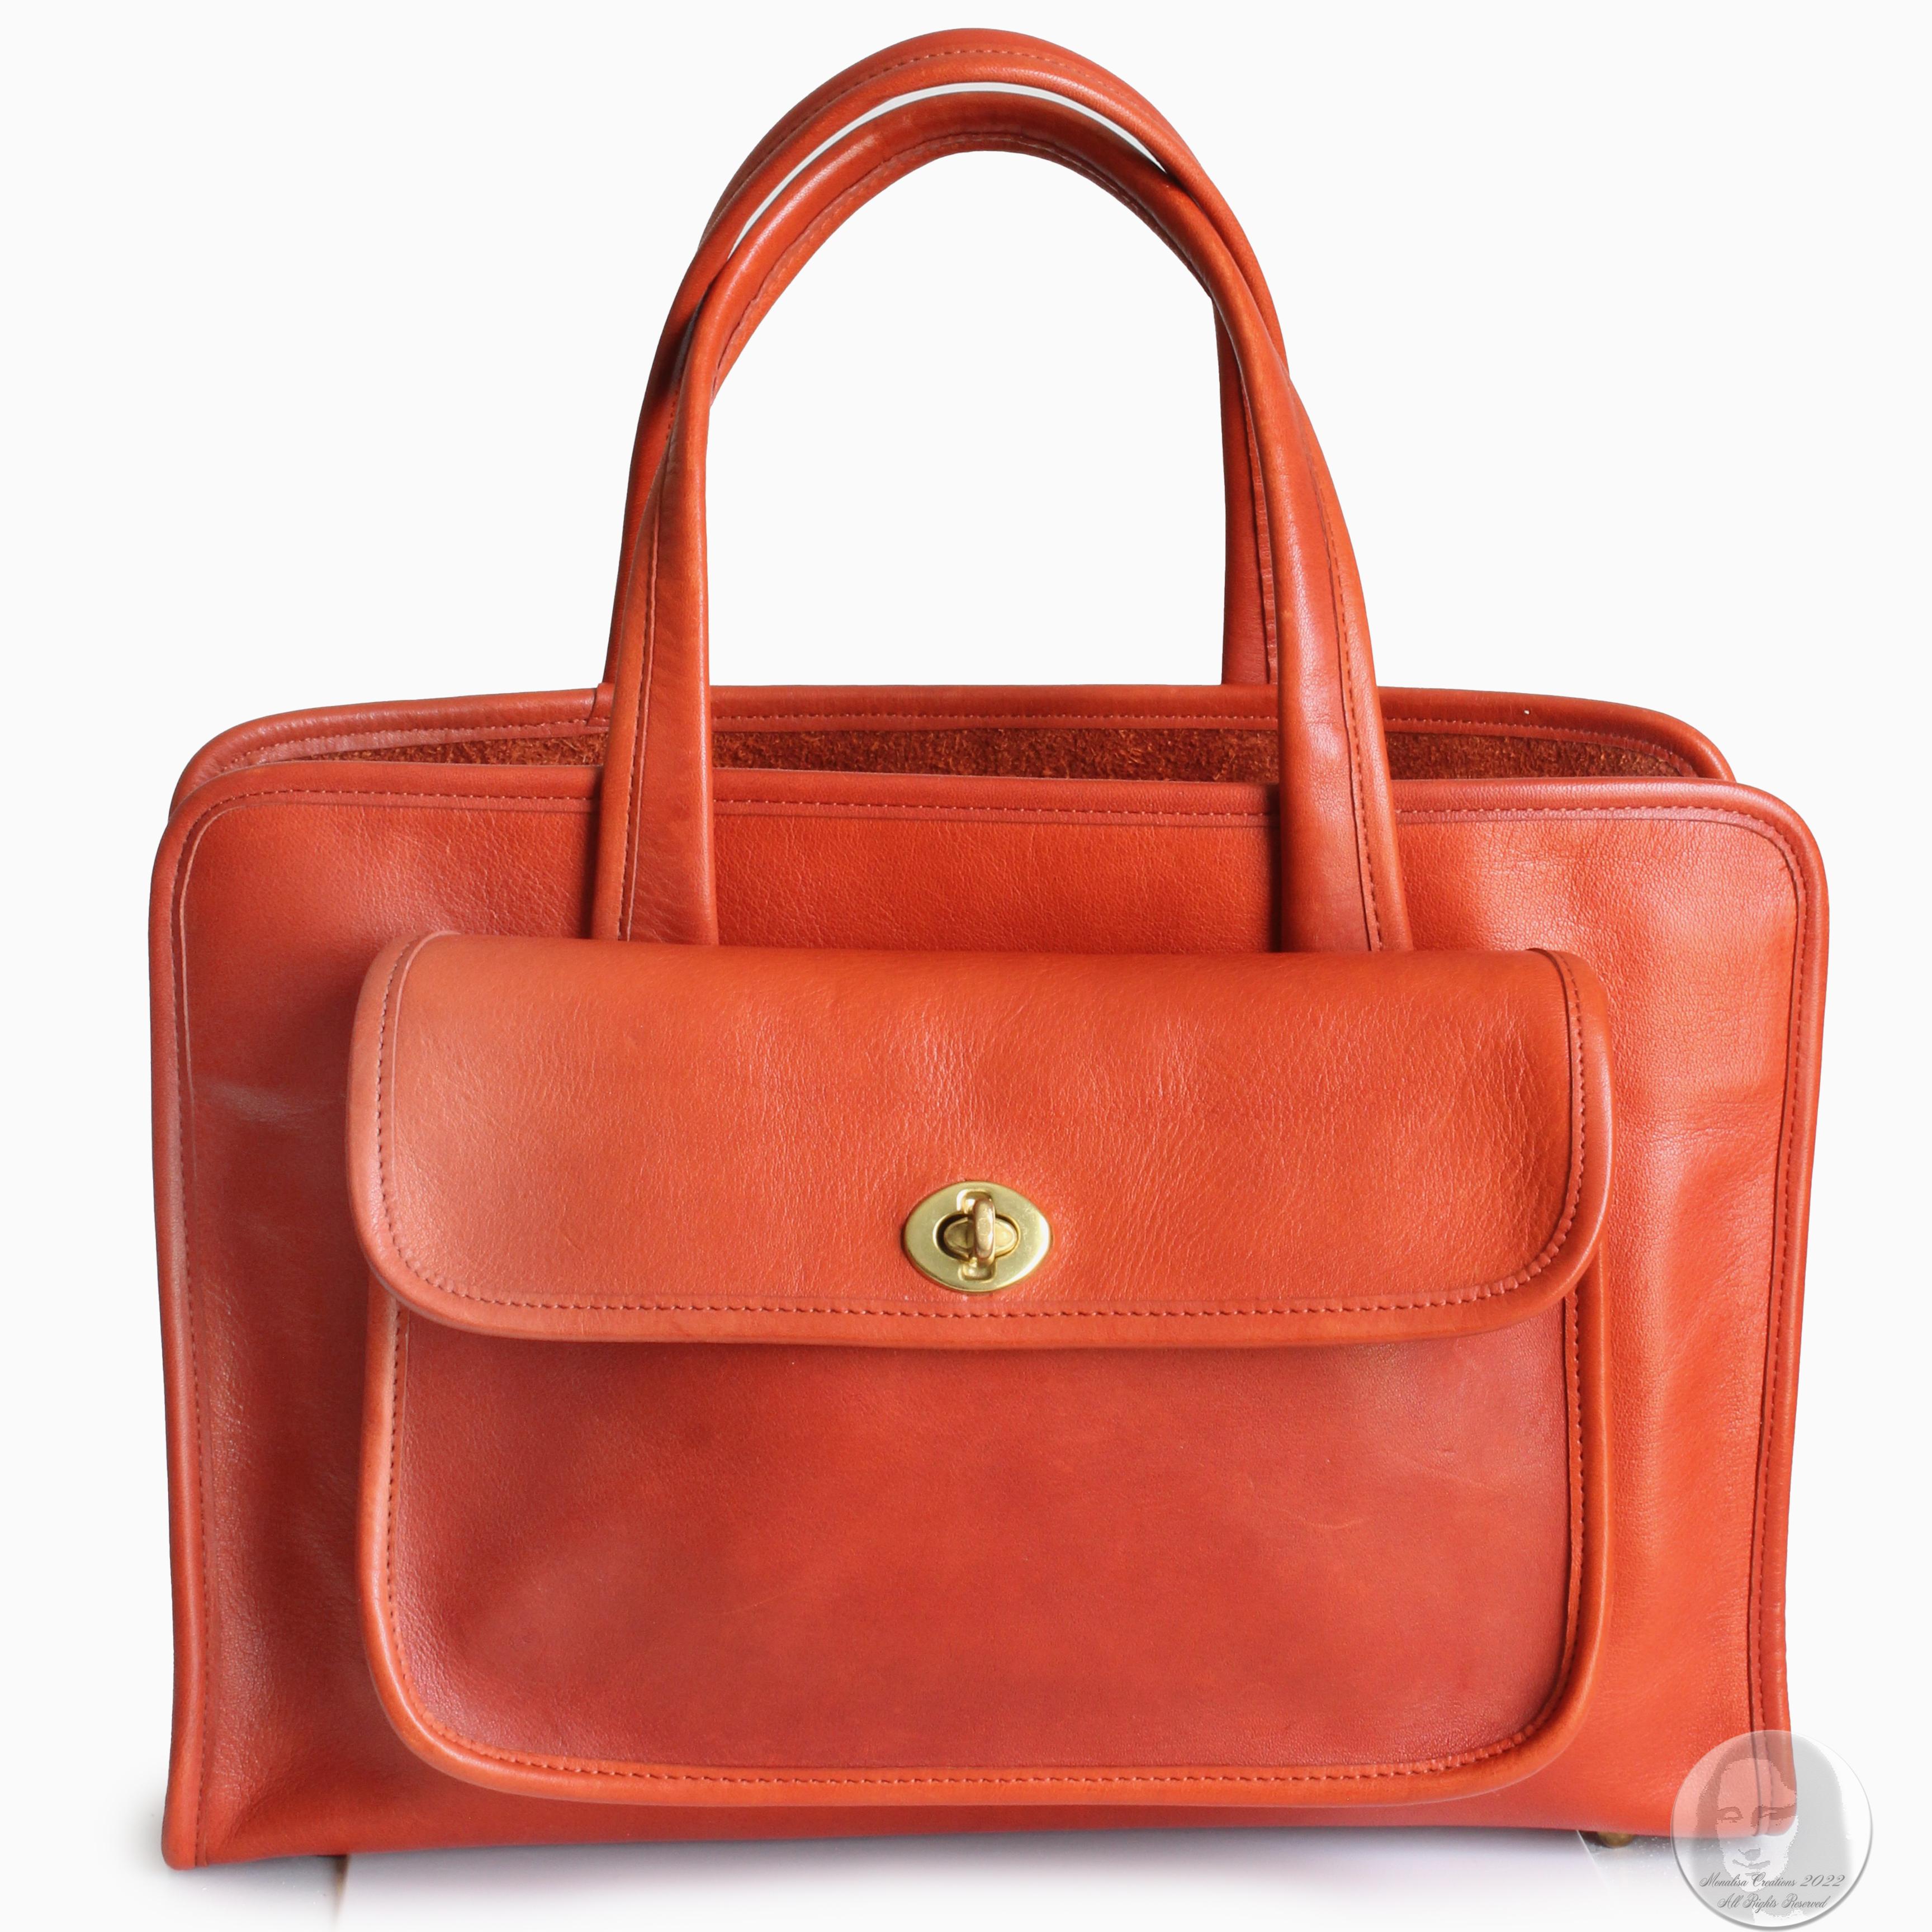 Rare bag alert!!! Vintage Coach Safari Bag or double pocket tote bag in gorgeous rust leather. Originally designed by Bonnie Cashin, we believe this bag was made in the early 70s and it's a little bit different than the other Safari style bags we've